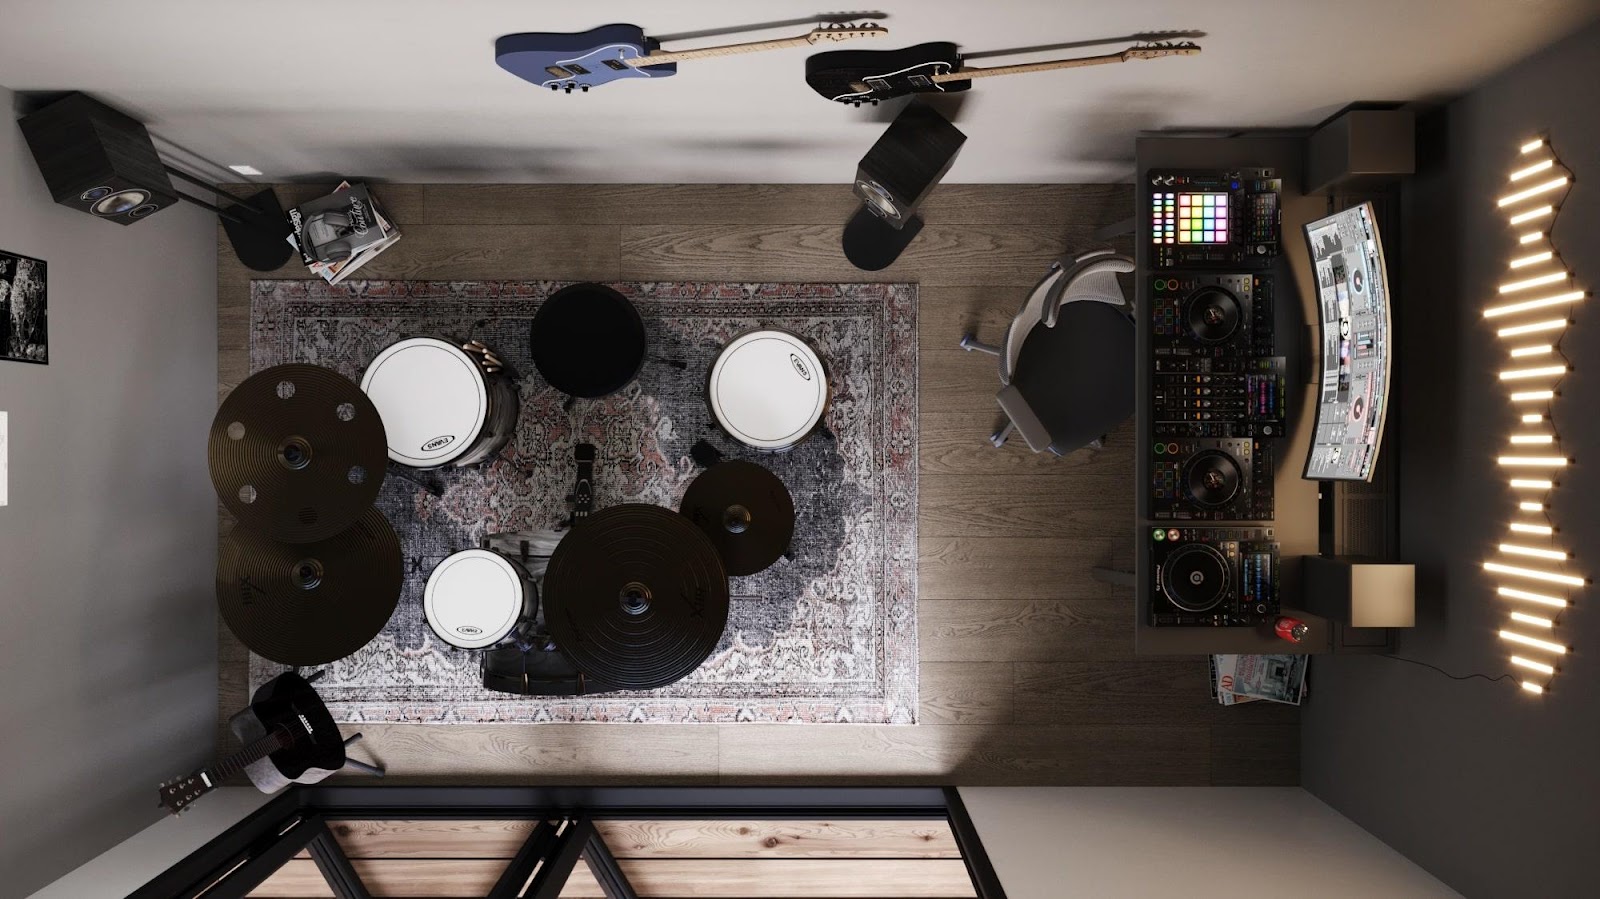 A drum set in a room

Description automatically generated